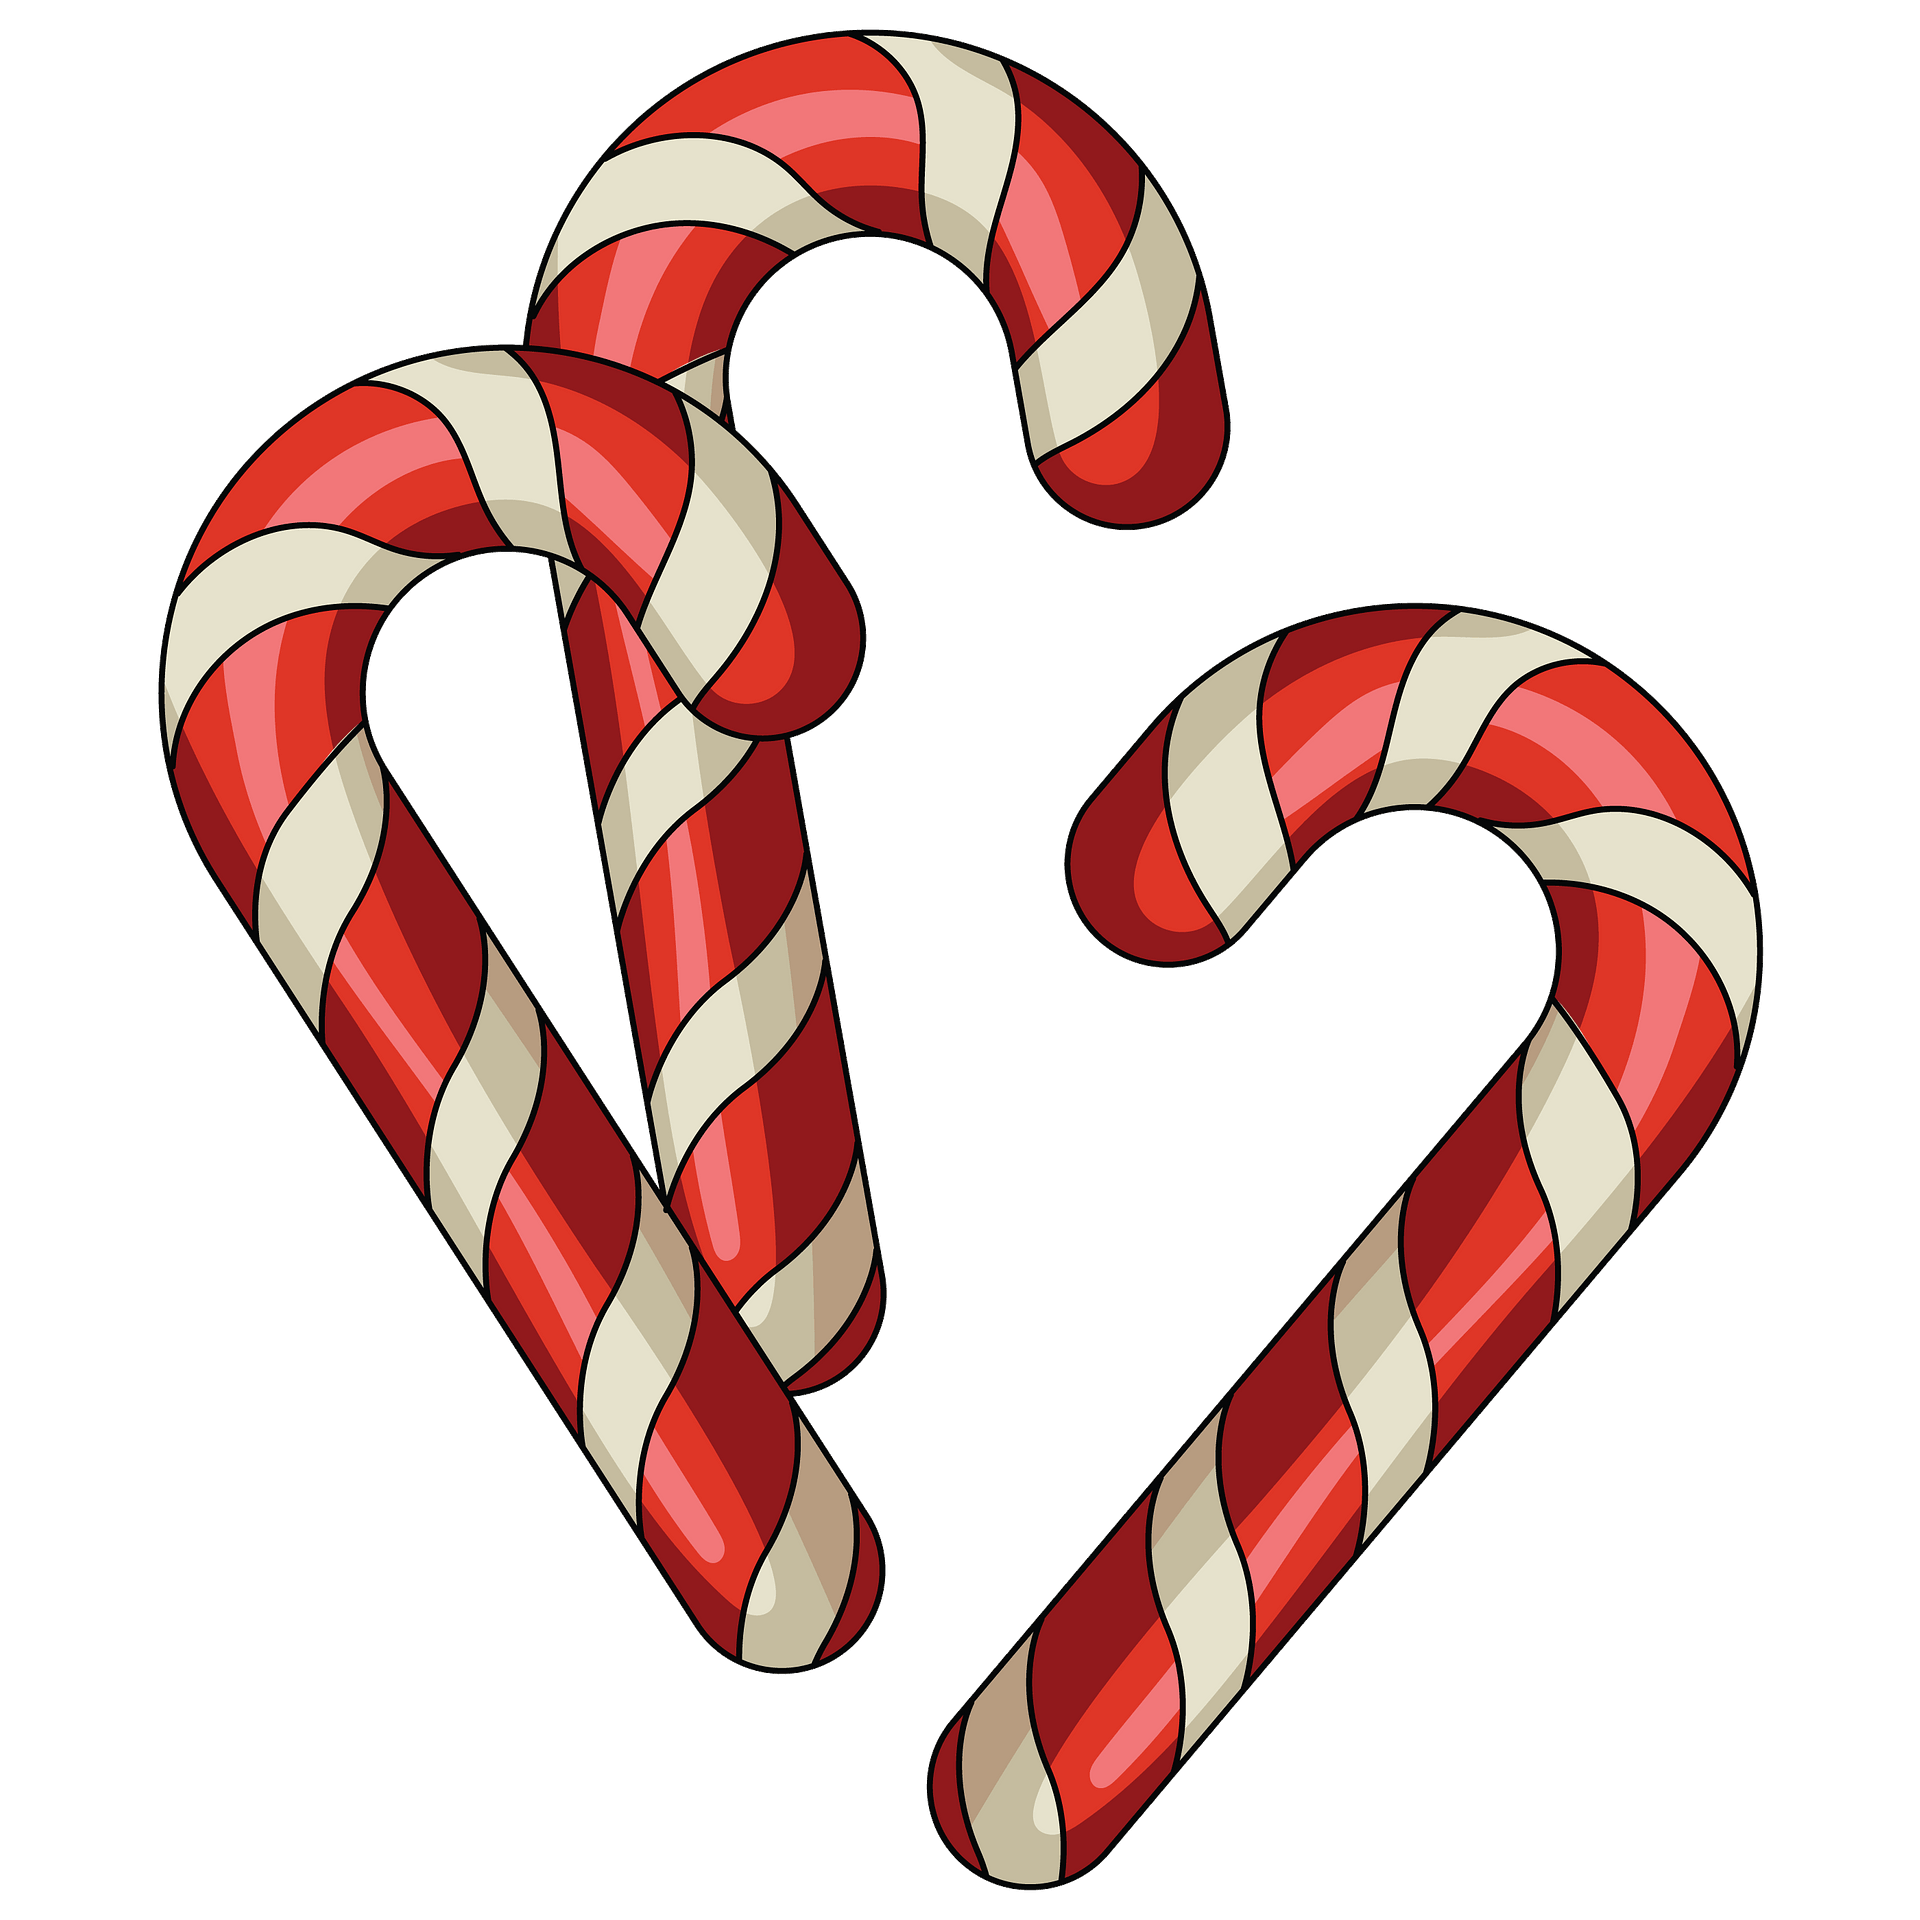 Candy cane PNG